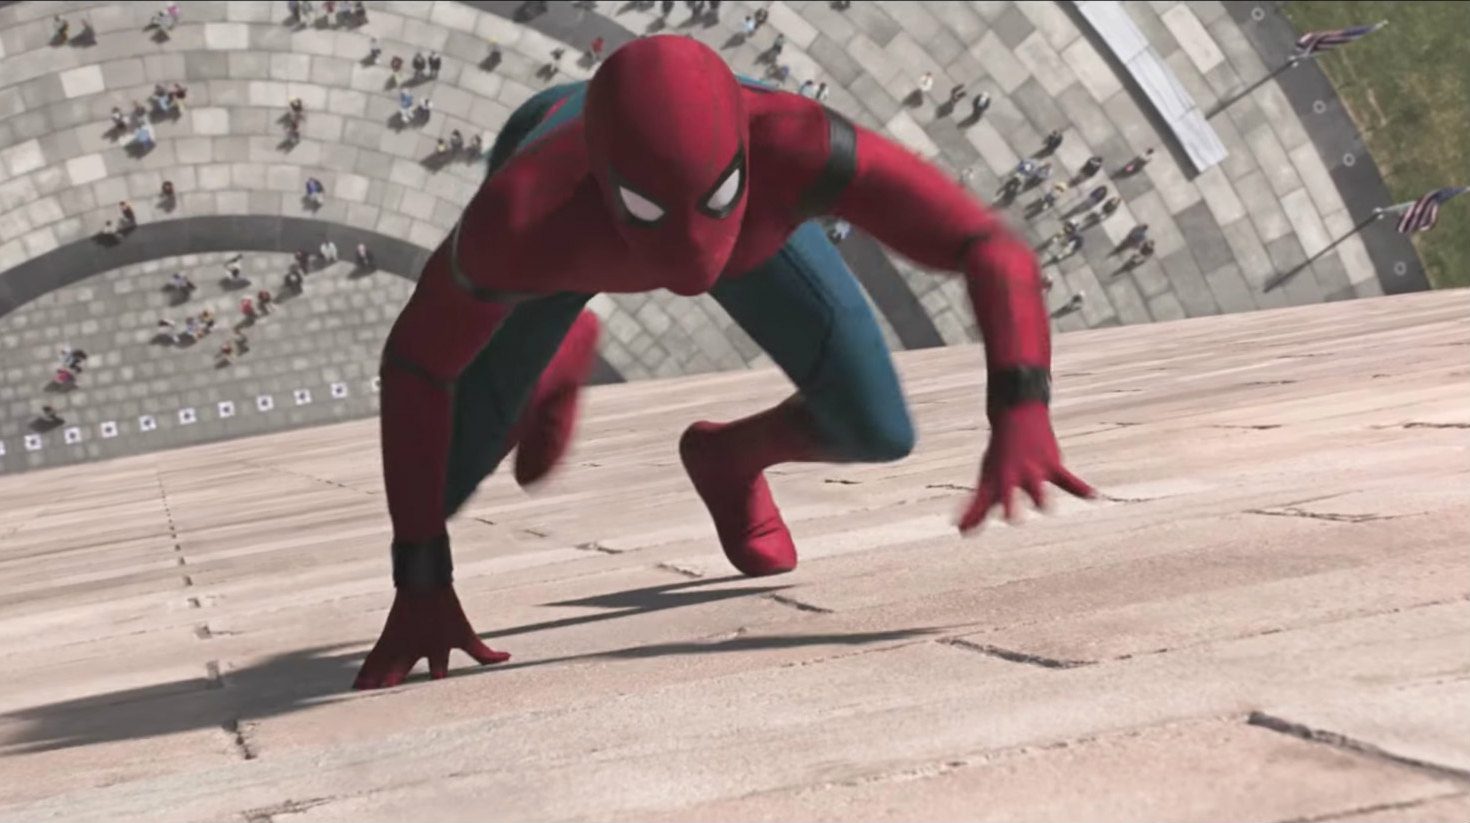 ‘Spider-Man’ casts a wide web to top weekend box office